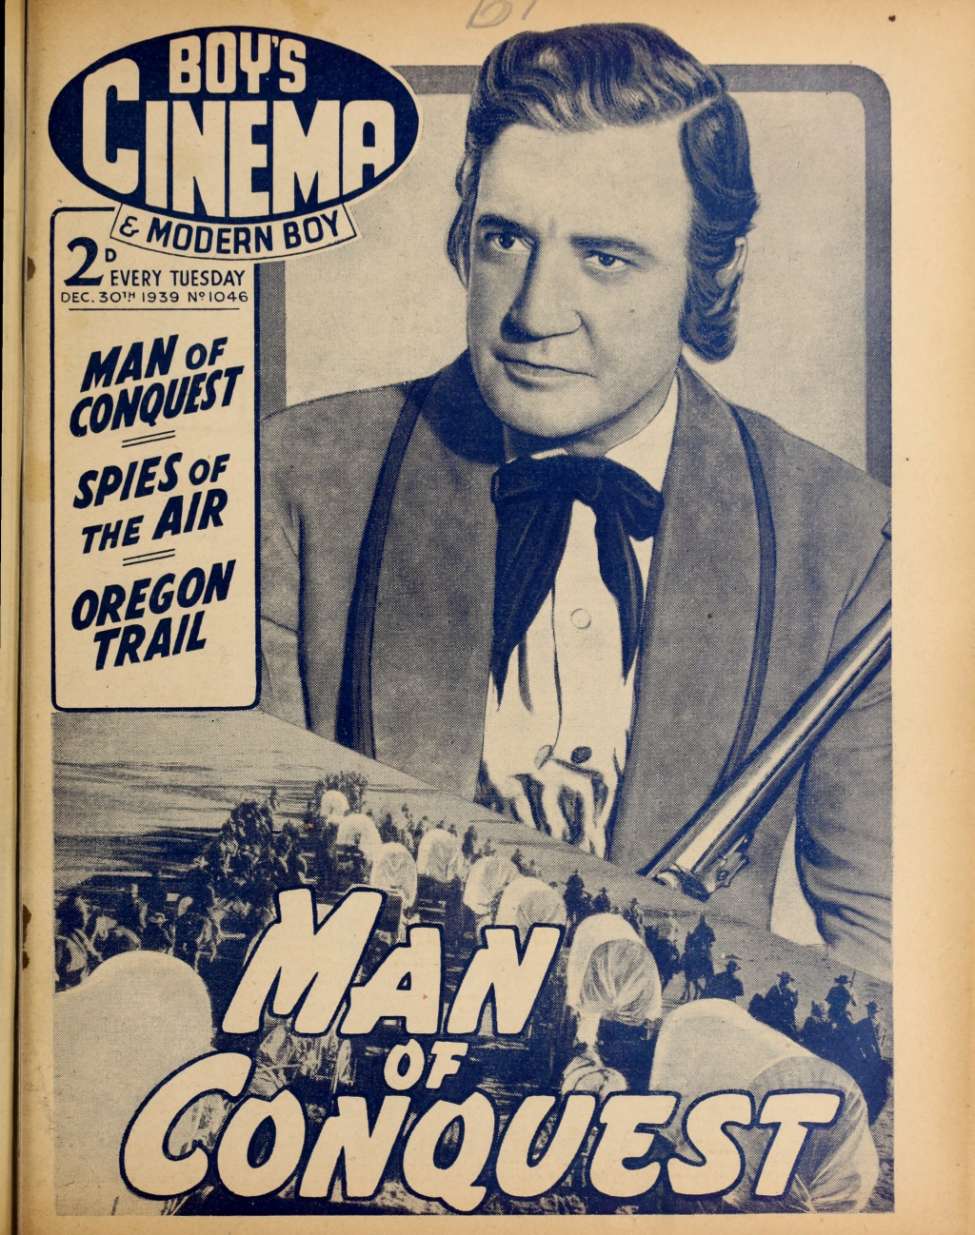 Comic Book Cover For Boy's Cinema 1046 - Man of Conquest - Richard Dix